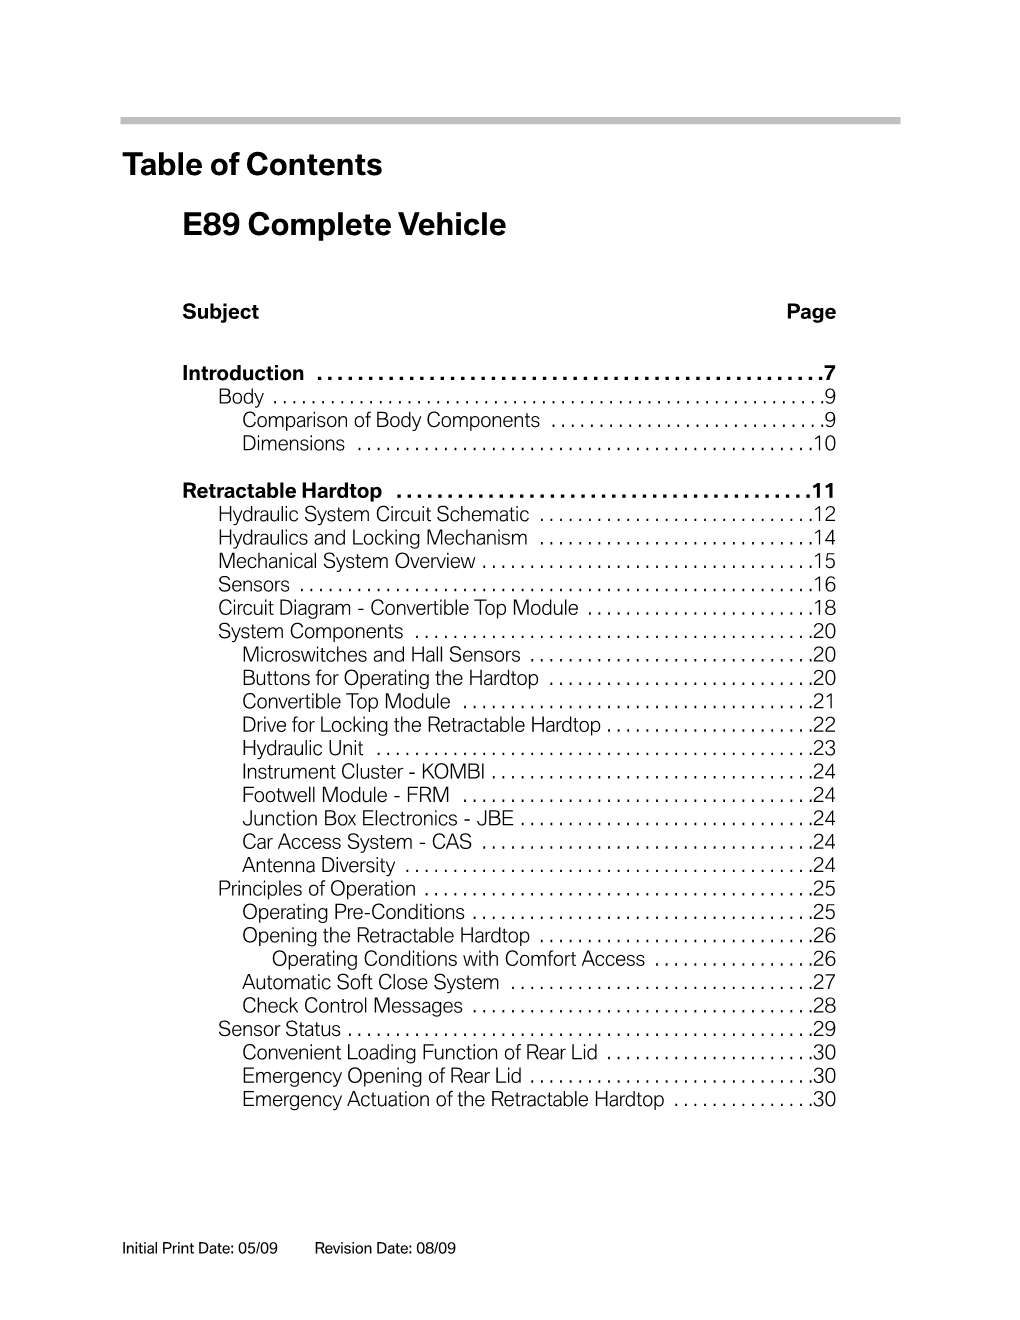 E89 Complete Vehicle Table of Contents